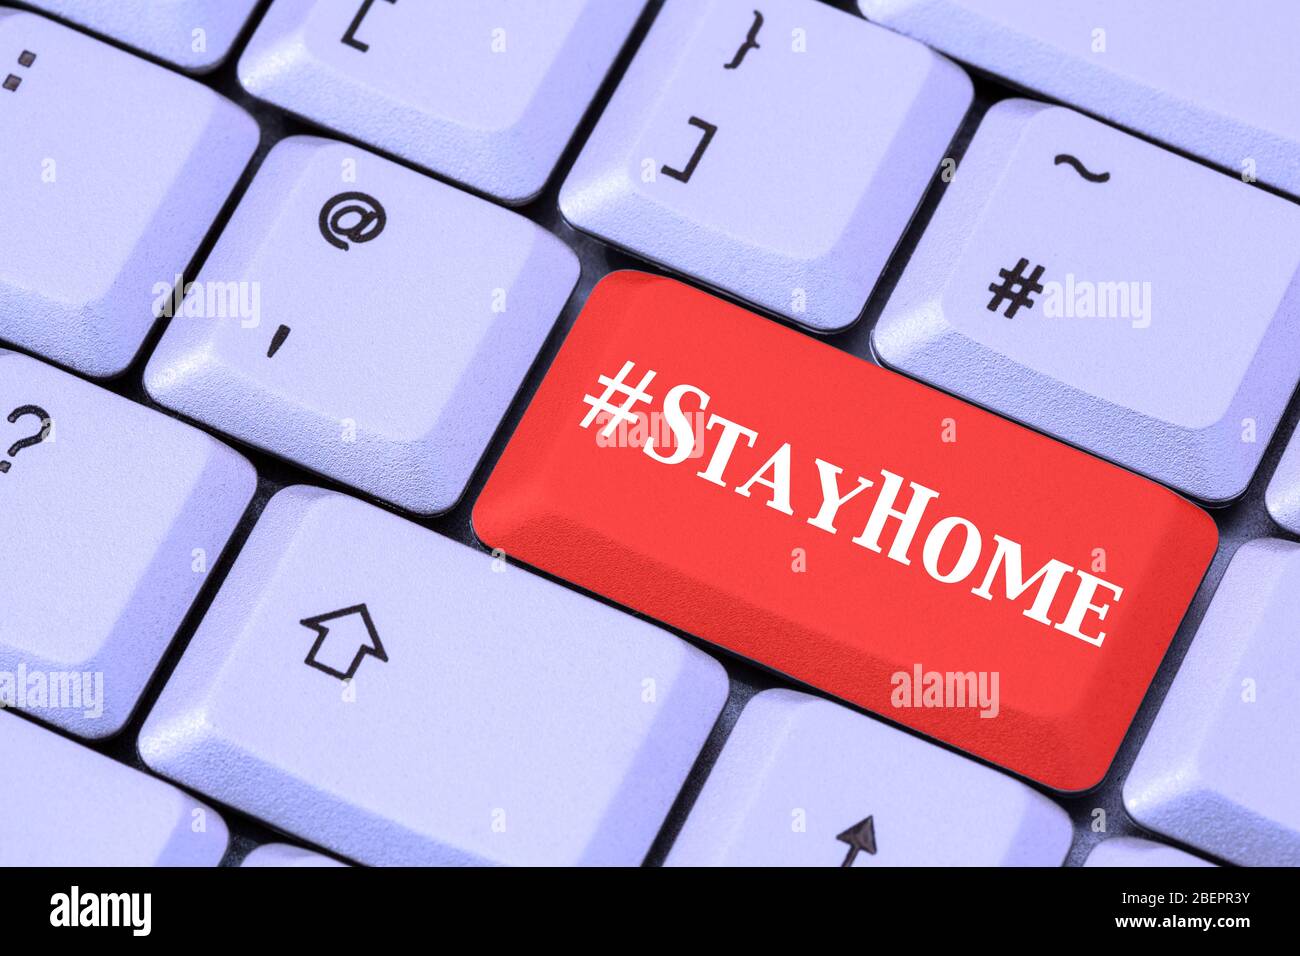 A keyboard with #StayHome on a red enter key. Covid-19 coronavirus pandemic stay at home lockdown concept in April 2020. England, UK, Britain Stock Photo